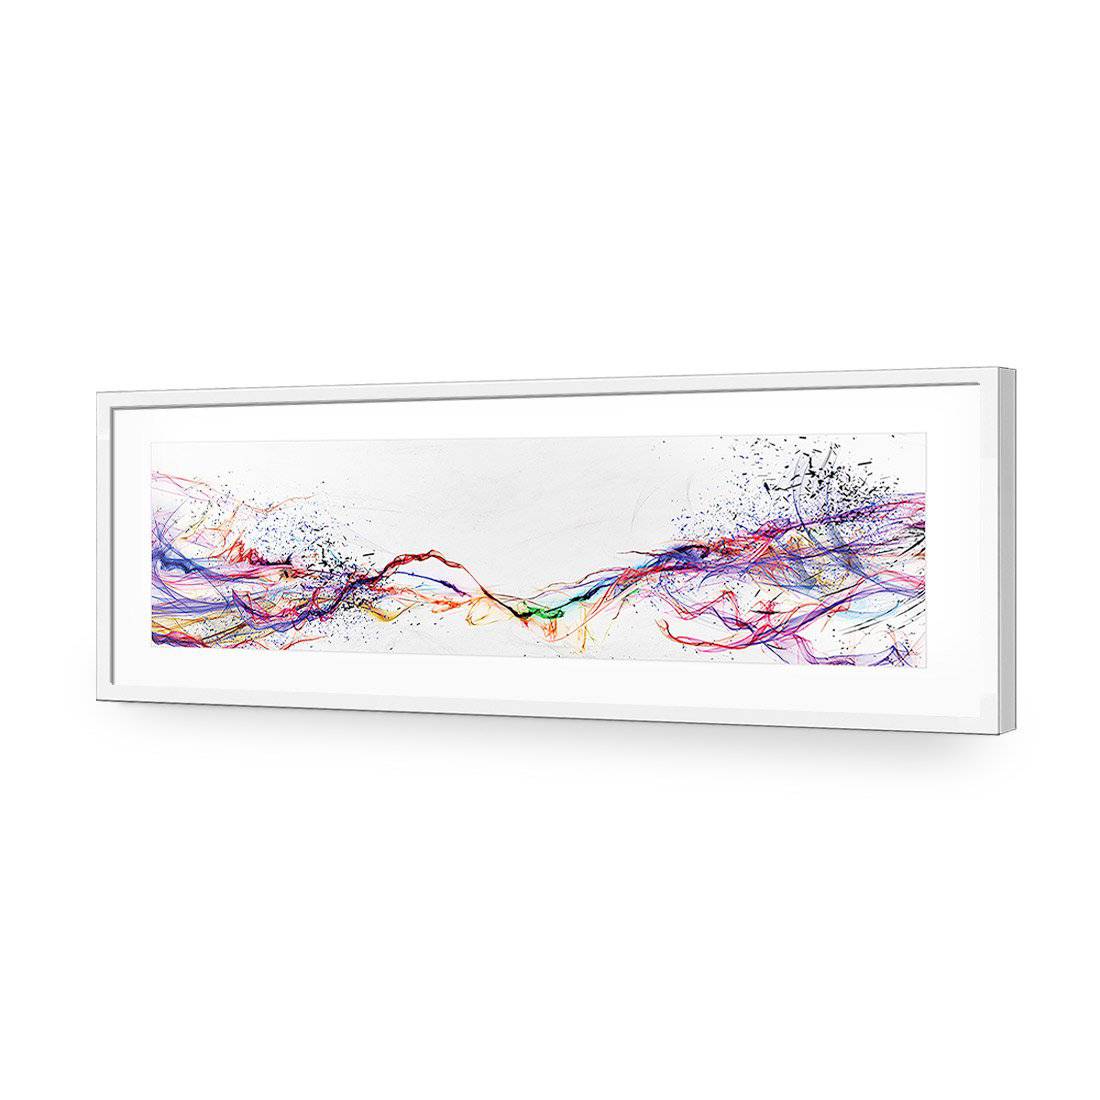 Electricity On Black, Inverted, Long-Acrylic-Wall Art Design-With Border-Acrylic - White Frame-60x20cm-Wall Art Designs